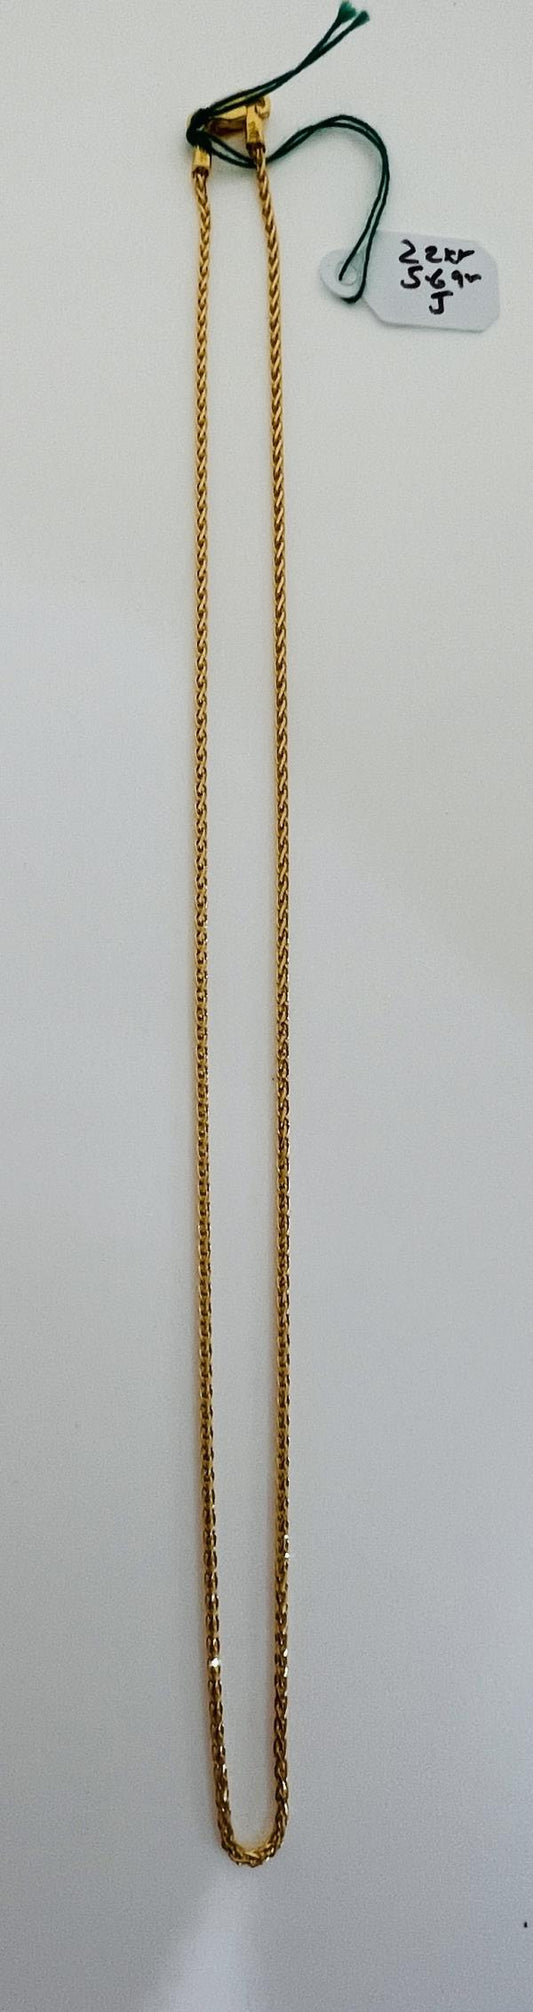 22KT GOLD CHAIN 14" 5.6GM